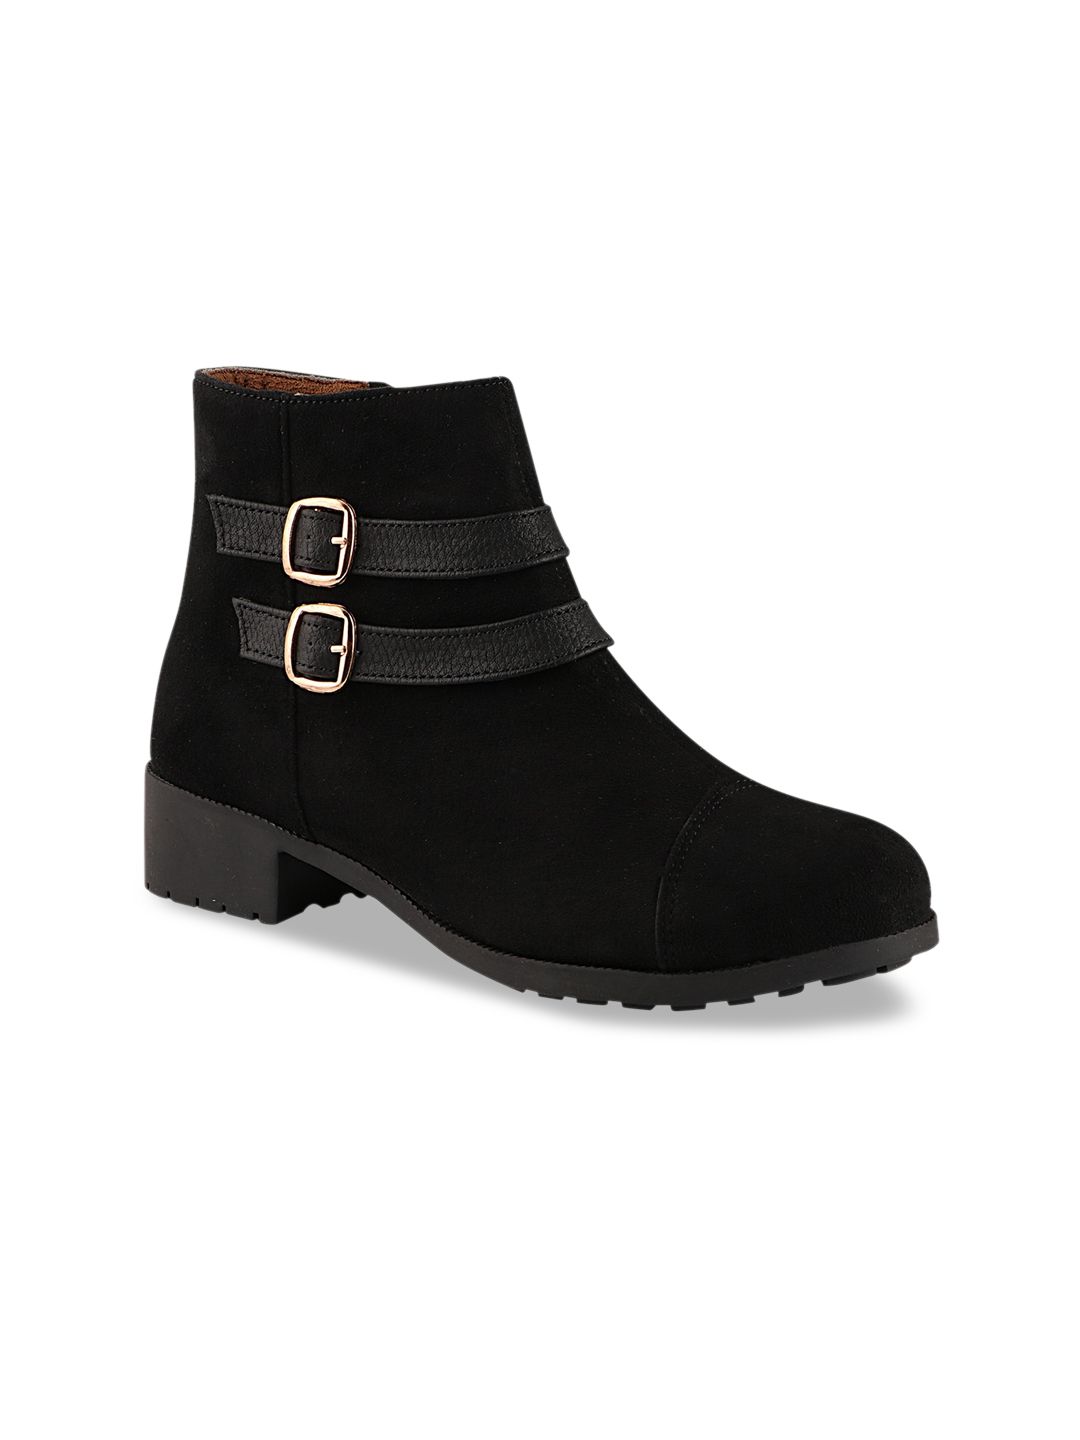 Shoetopia Women Black Solid Mid-Top Heeled Boots Price in India